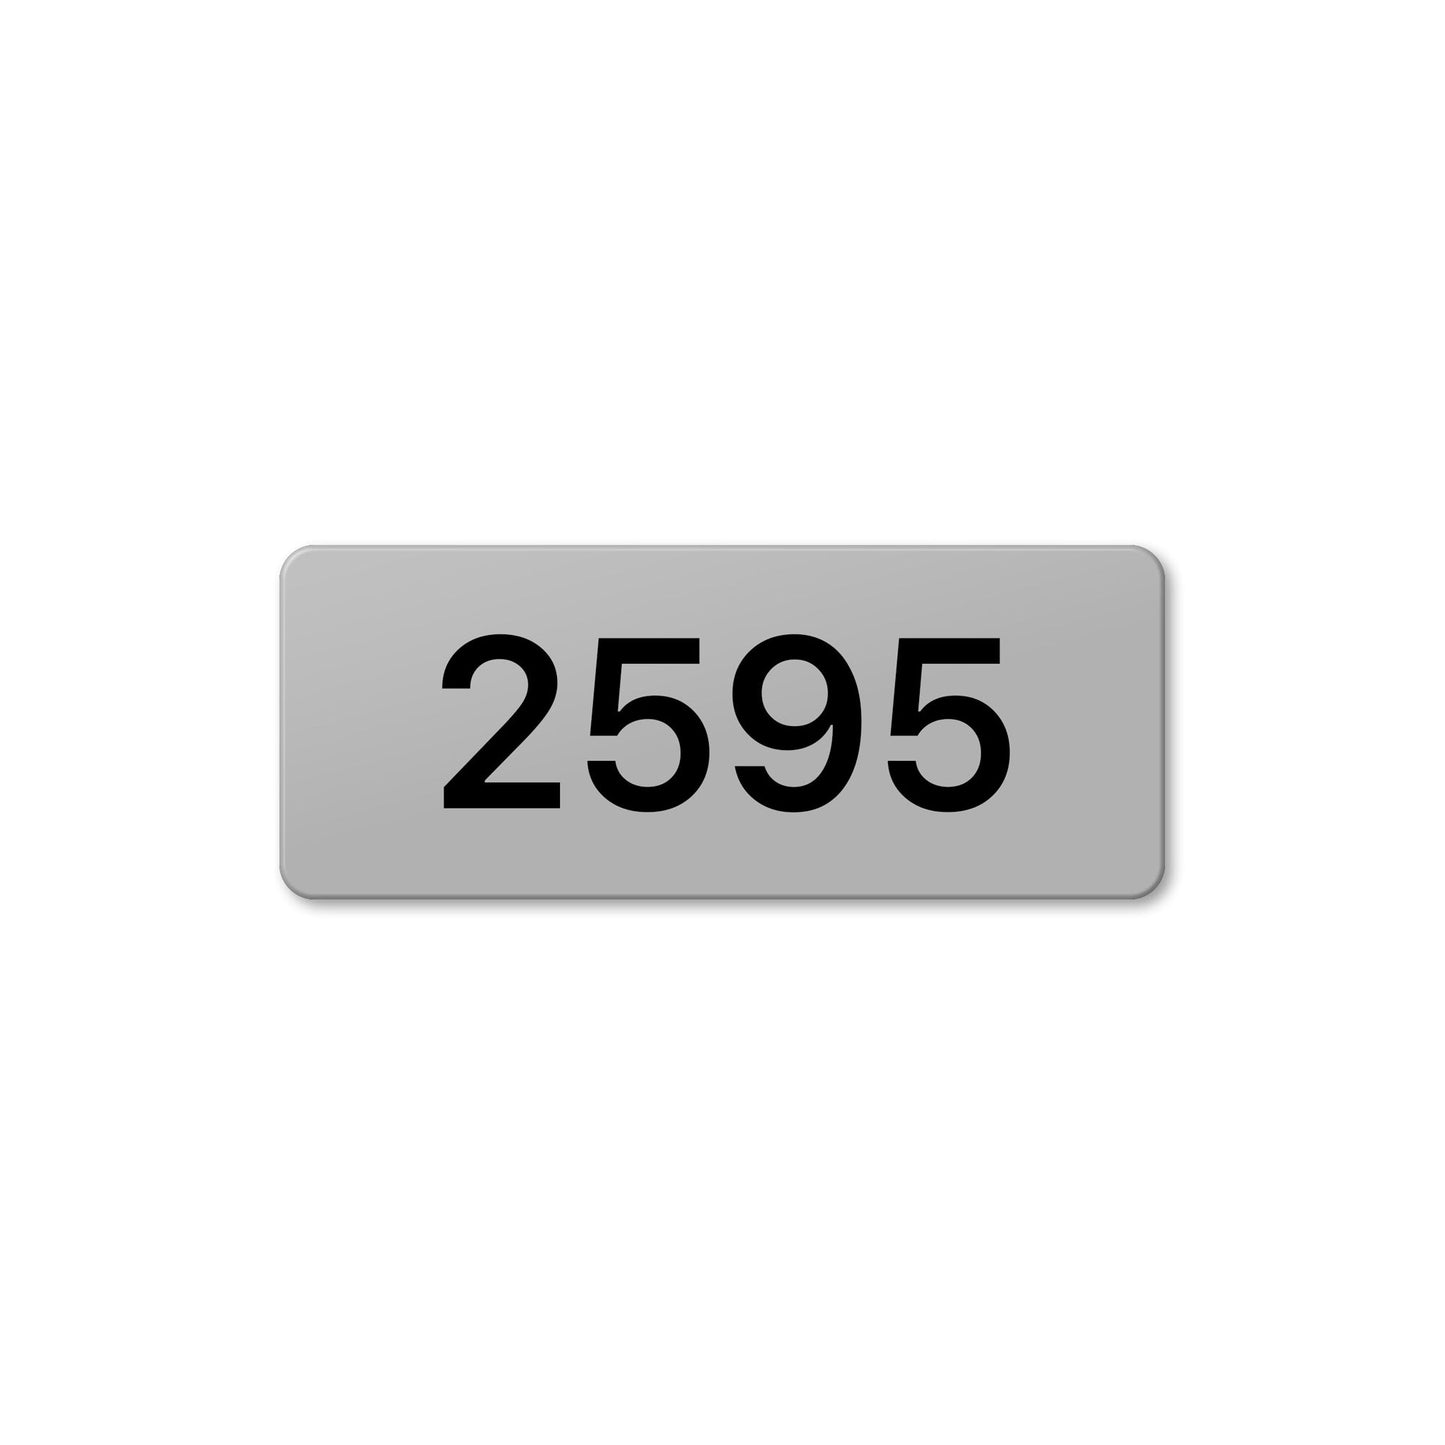 Numeral 2595